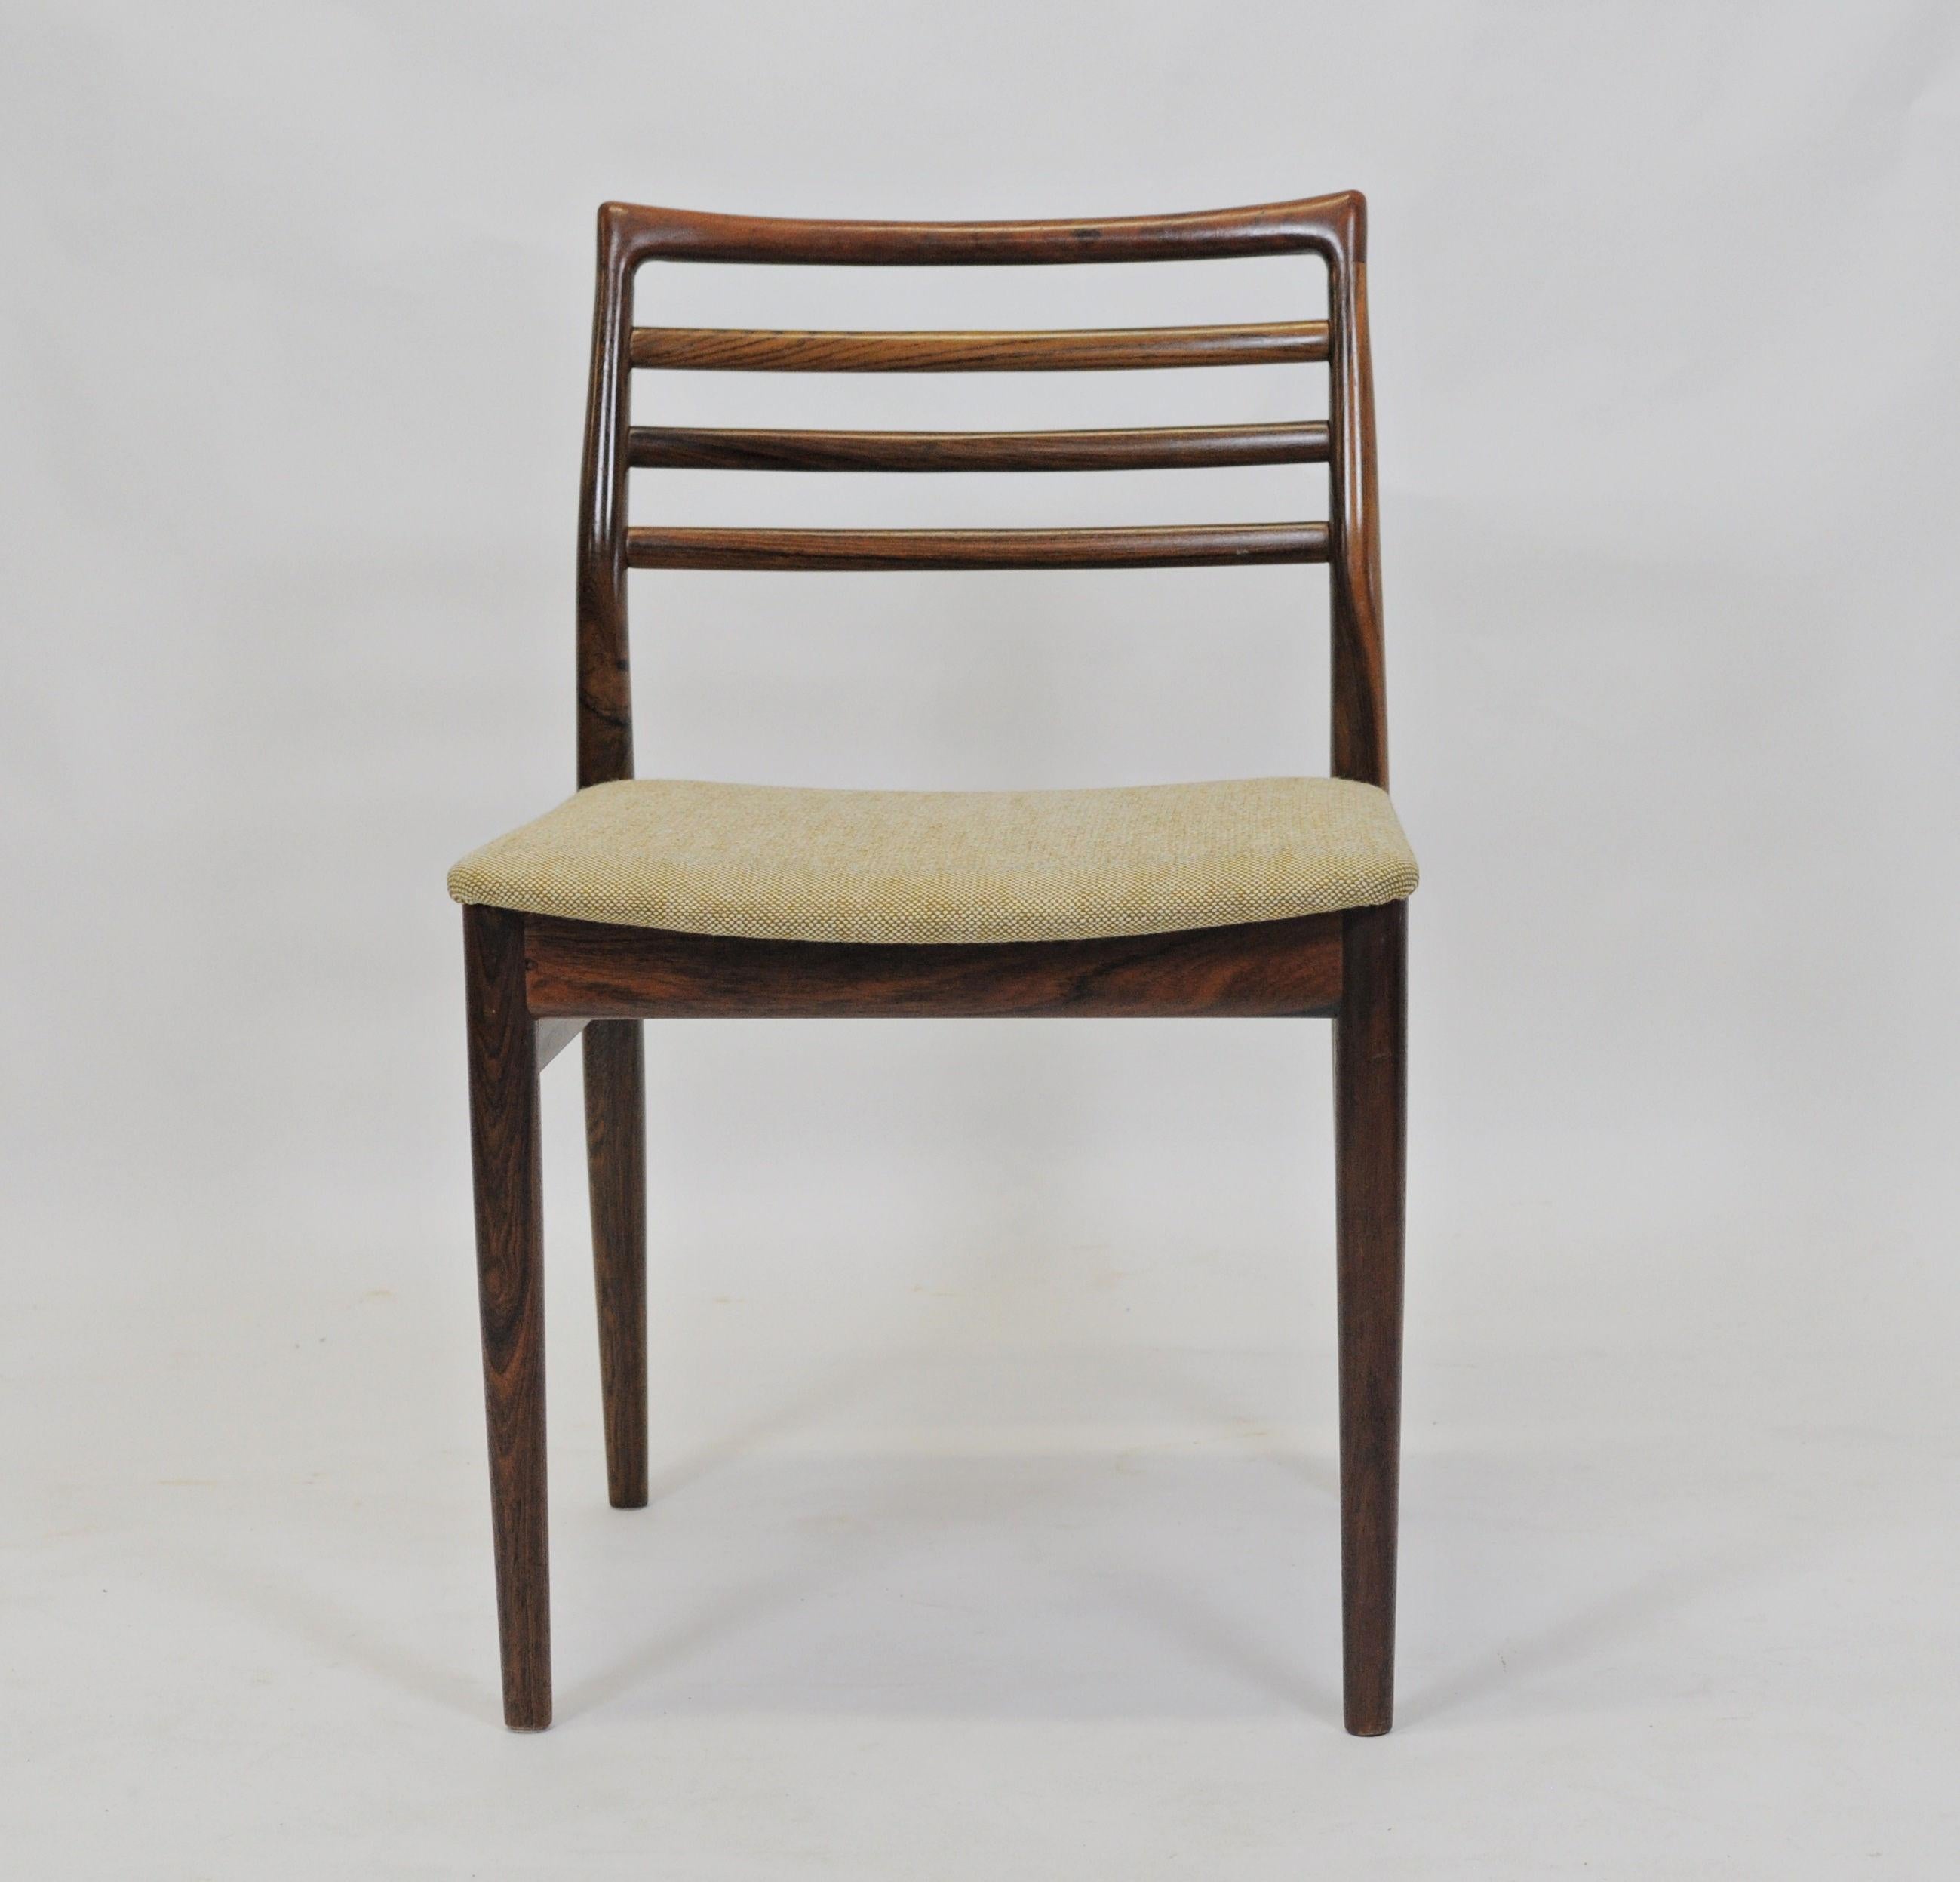 Rosewood dining chairs designed by Erling Torvits for Sorø Møbelfabrik.

The organic shaped wooden frames in rosewood have been overlooked and refinished by our cabinetmaker and are in very good condition with only few and small signs of age and